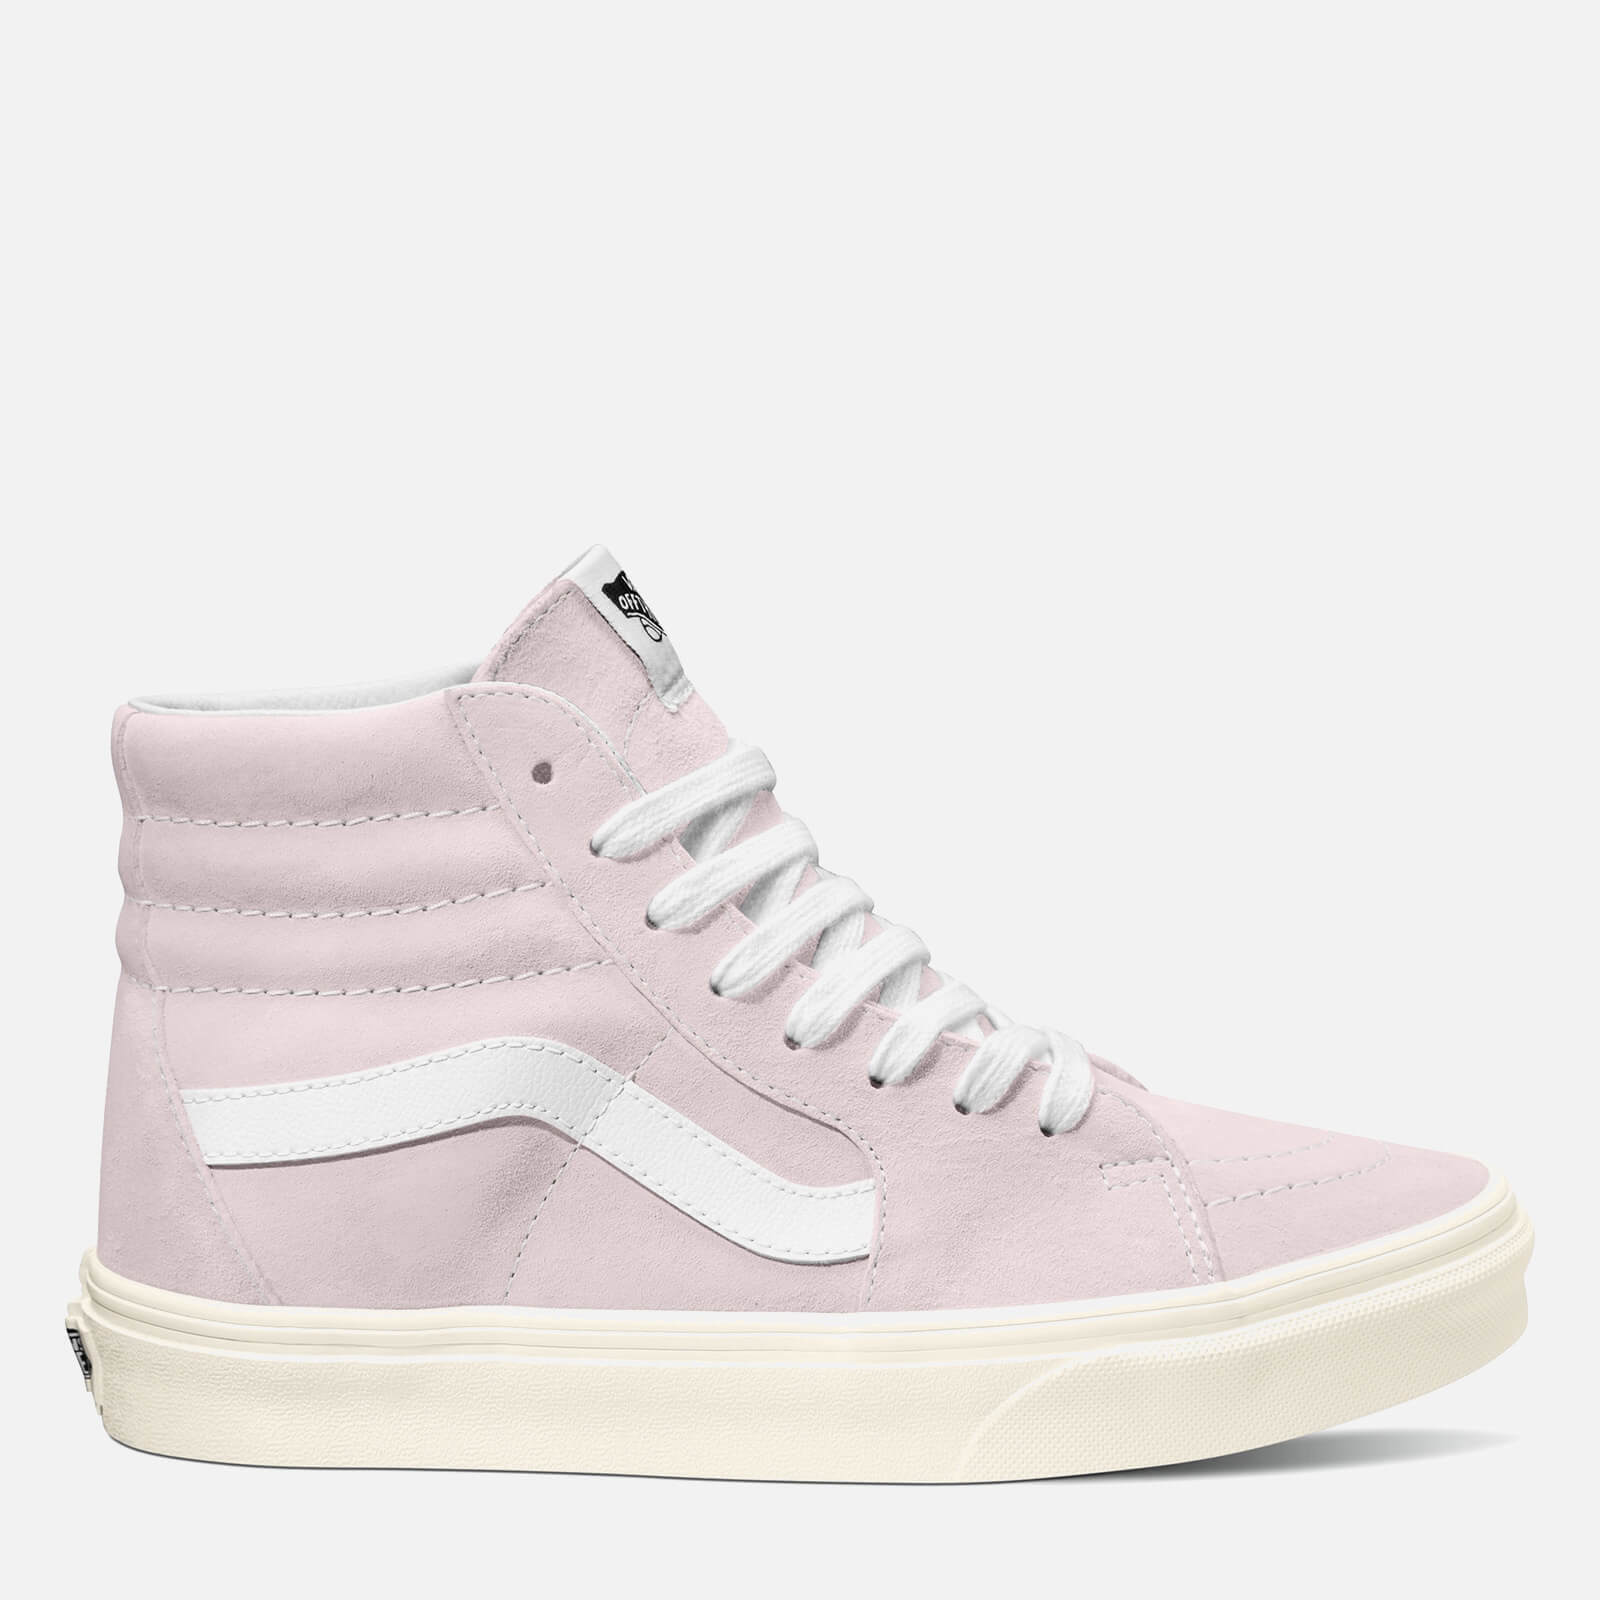 Vans Women's Suede Sk8 Hi-Top Trainers - Orchid Ice/Snow White